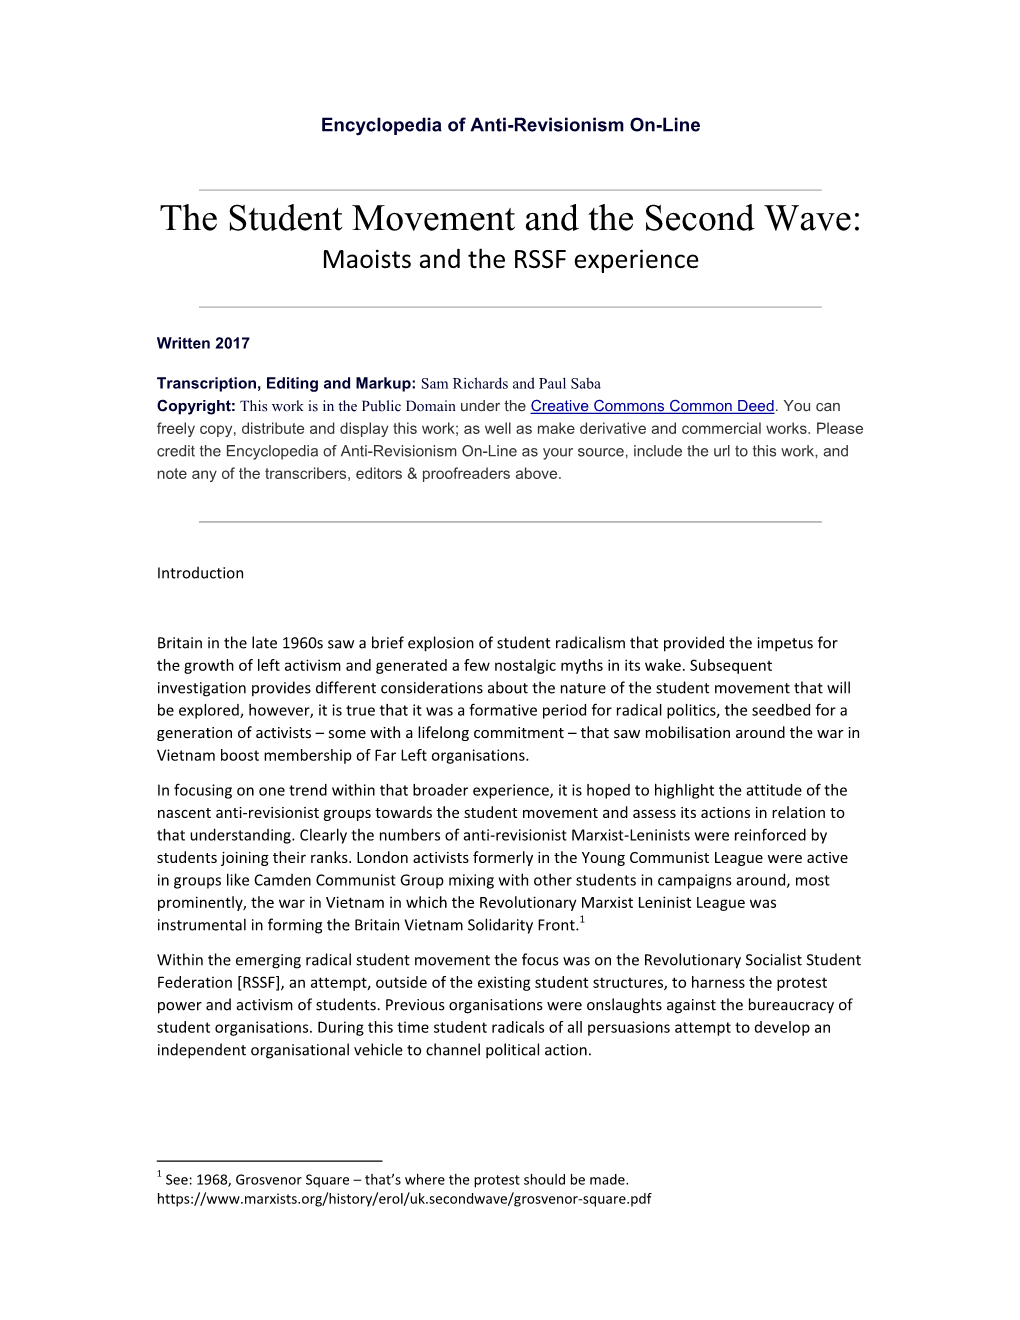 The Student Movement and the Second Wave: Maoists and the RSSF Experience